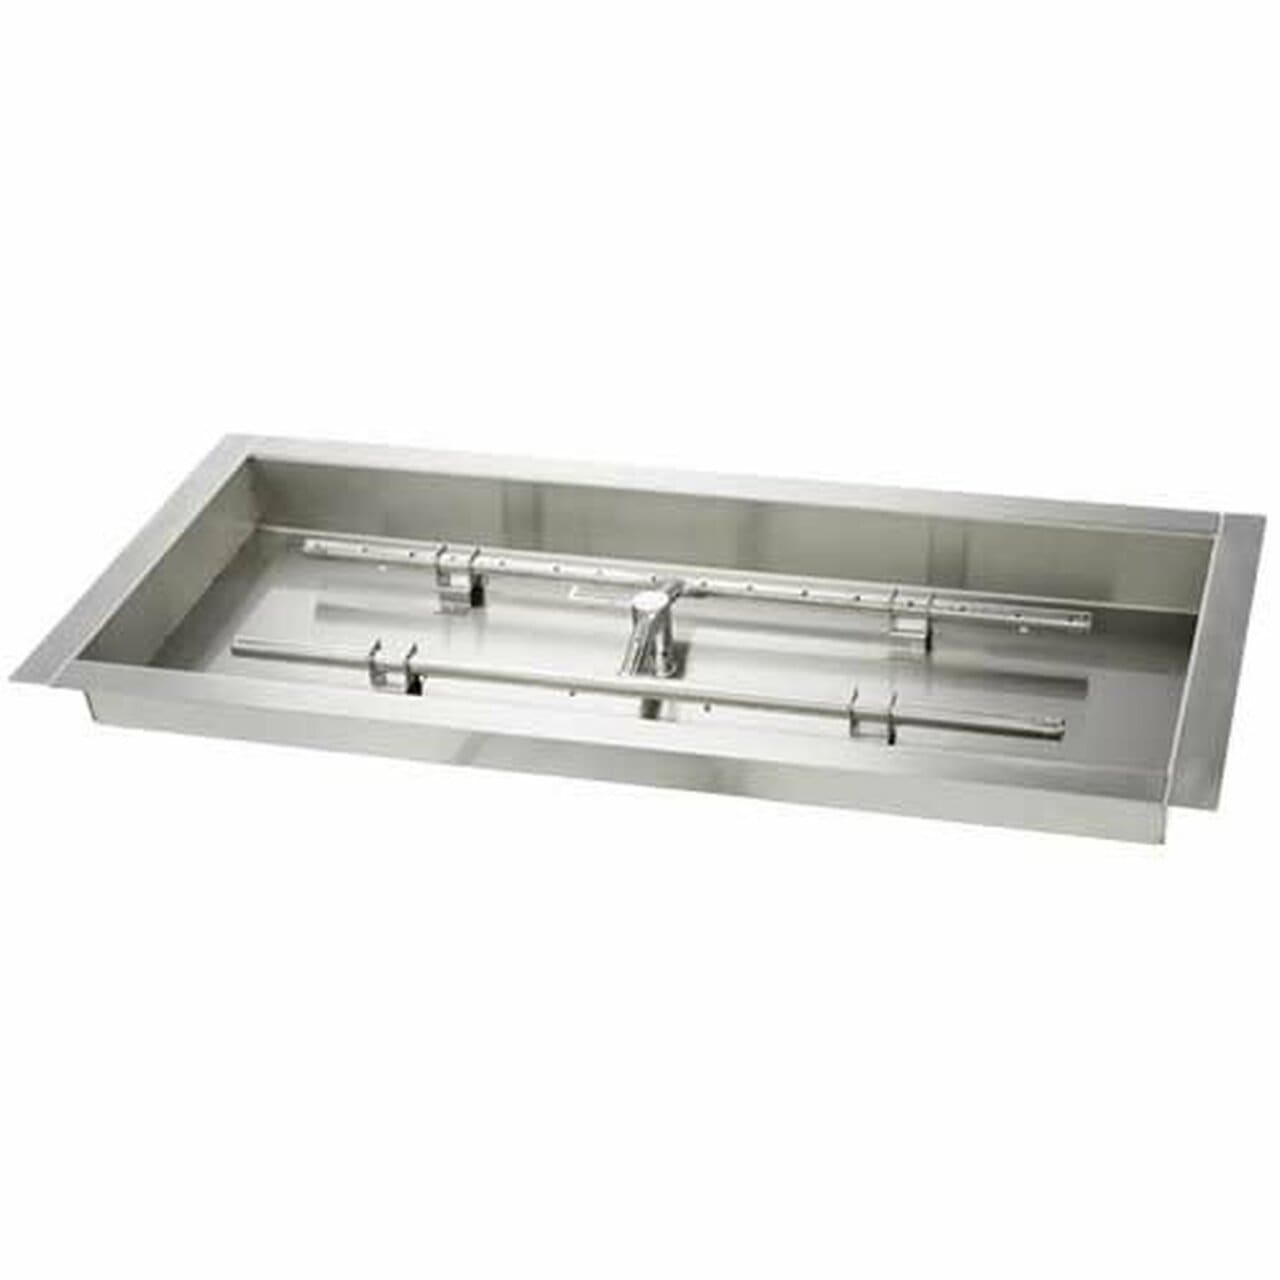 HPC Fire 36 X 14" Pan with SST Torpedo H-Burner made from 304 Stainless Steel - LP TOR-36X14SS-H-LP